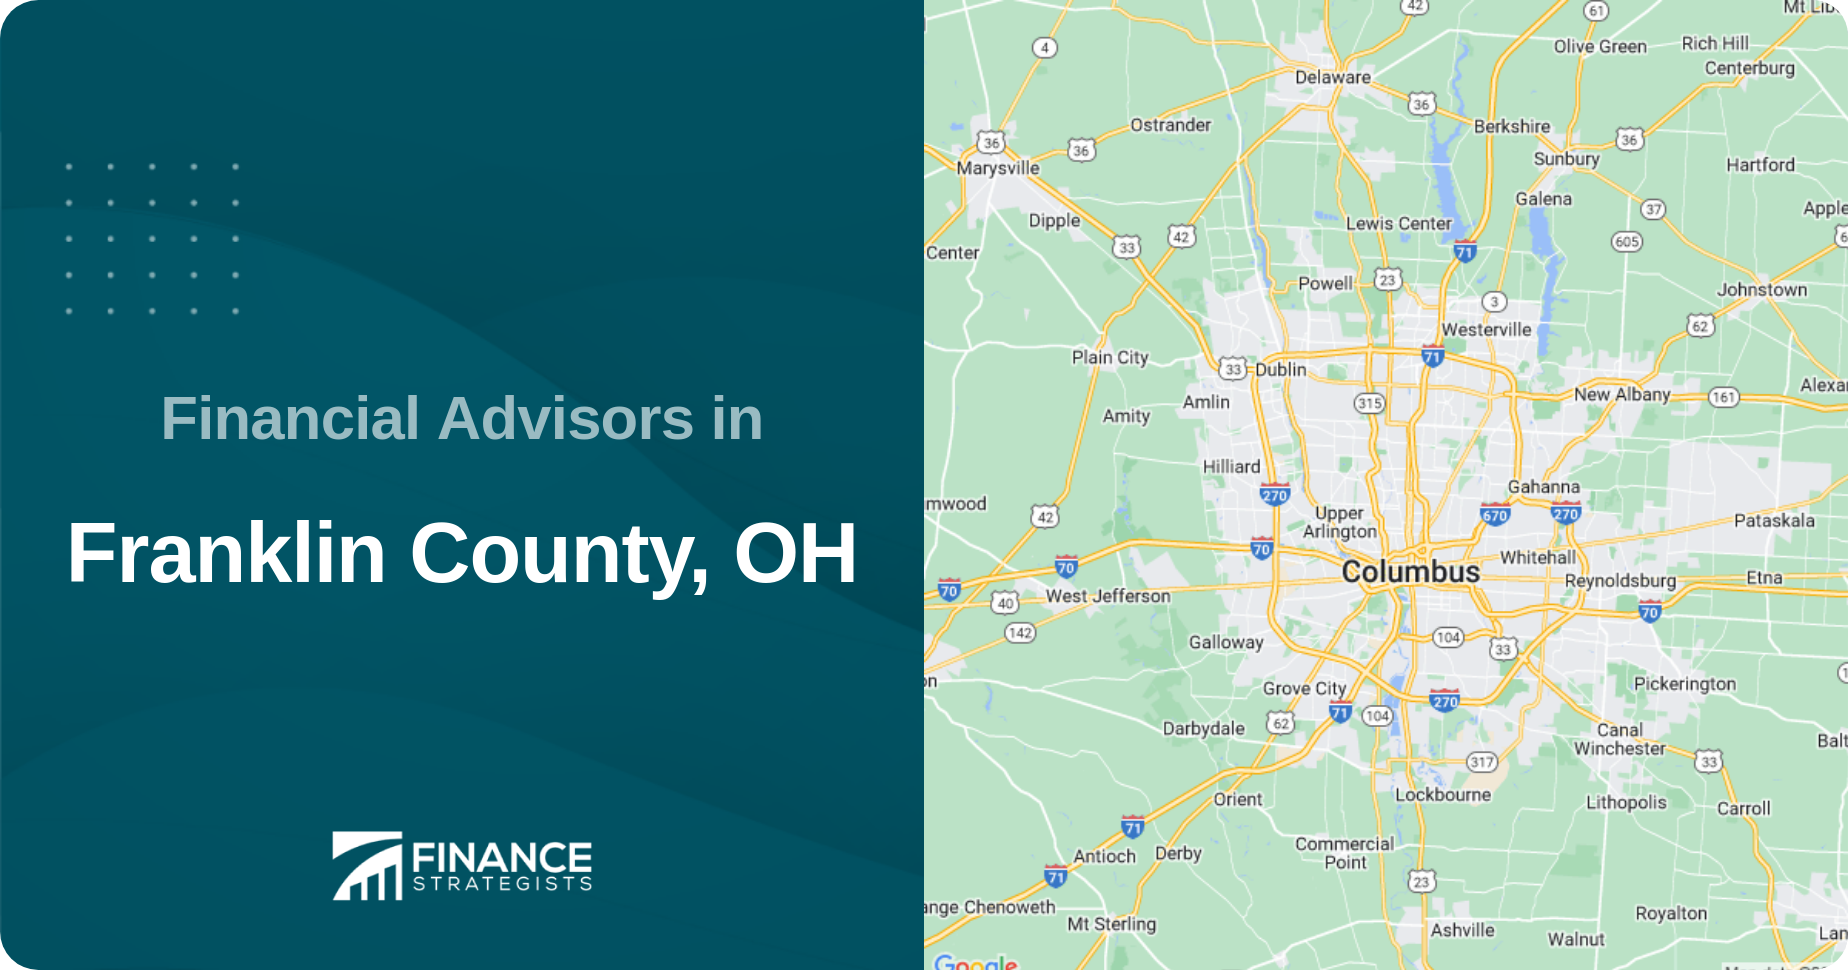 Financial Advisors in Franklin County, OH